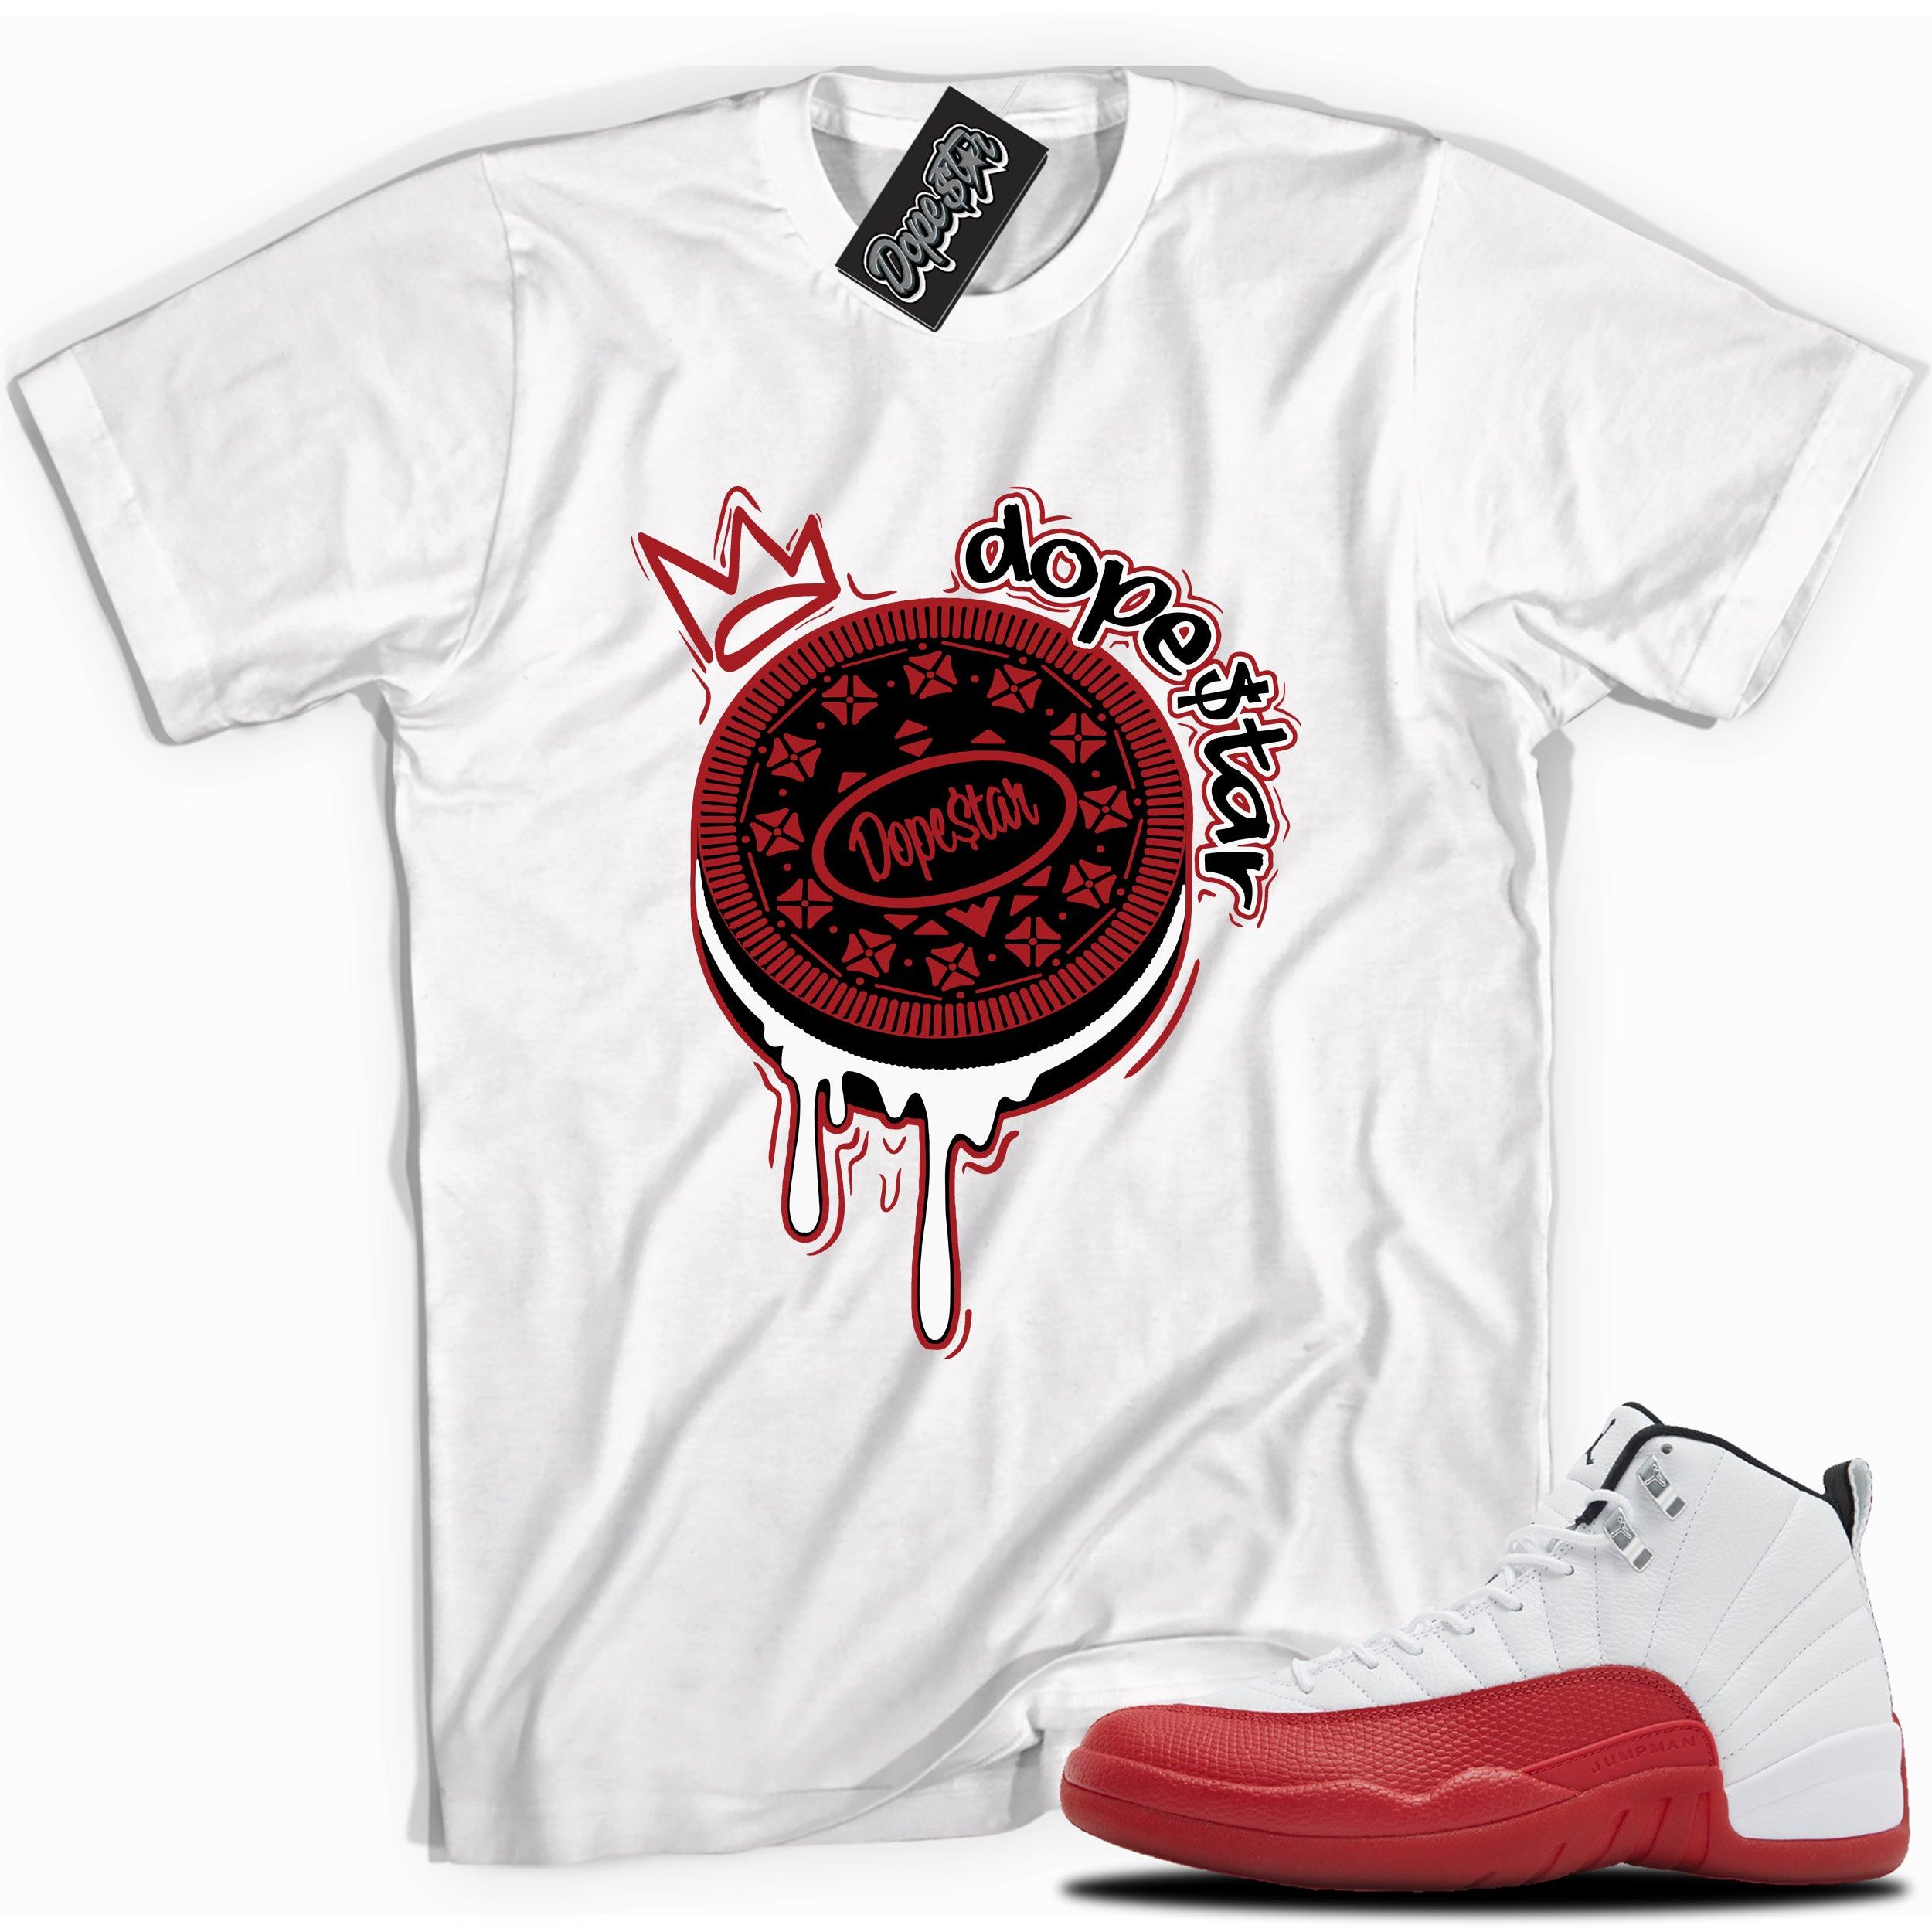 Cool White graphic tee with “OREO DS” print, that perfectly matches Air Jordan 12 Retro Cherry Red 2023 red and white sneakers